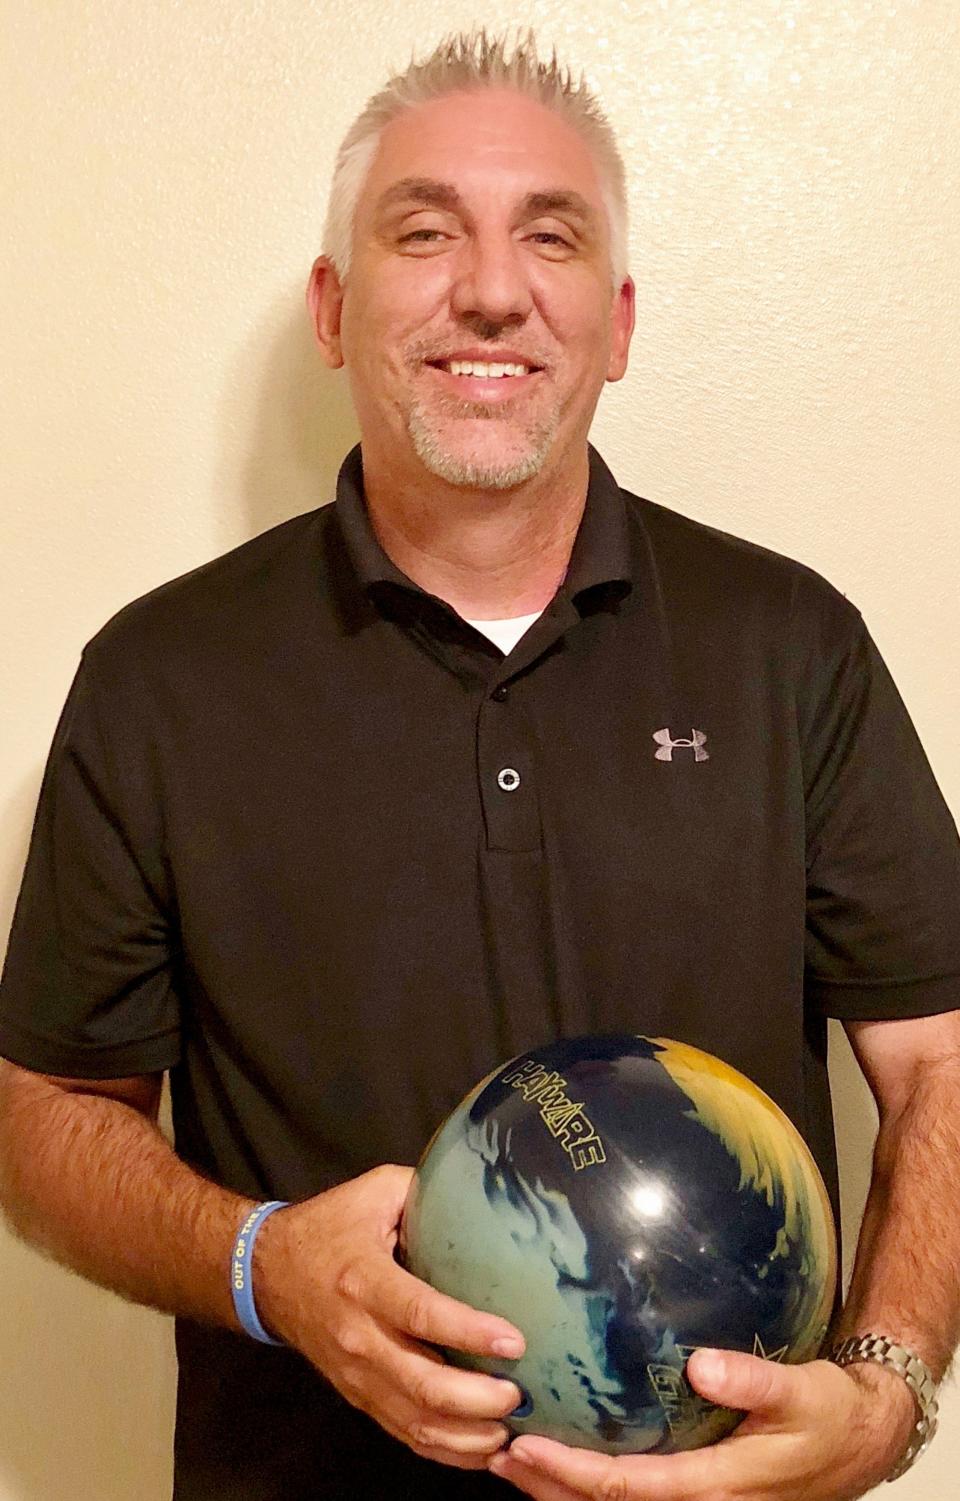 Matt Hill rolled his first-ever 700 series last week with a 712  on games of 198, 246 and 268 that included 20 strikes at Dixie Bowl. A former star athlete at Virgin Valley High School in Mesquite, he was a state champion in the high jump and the varsity football team's kicker. He's now the general manager at Burton Lumber in St. George.